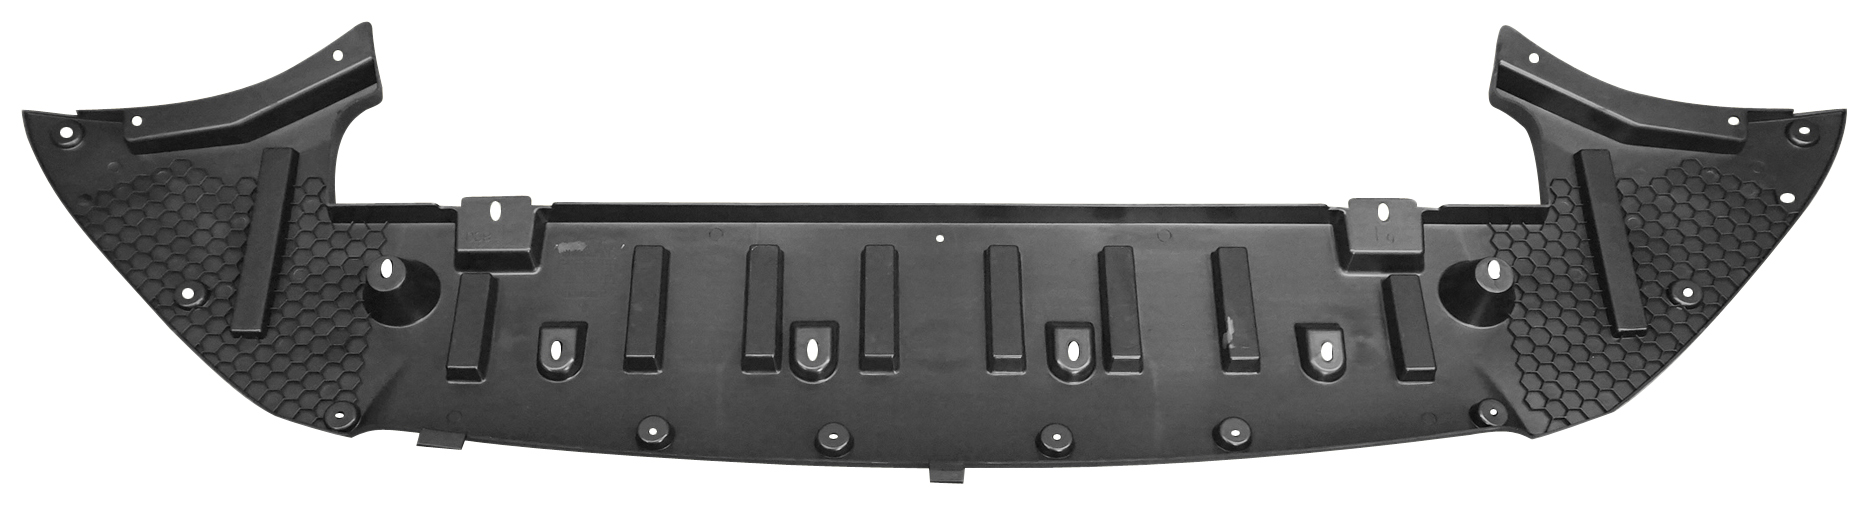 Aftermarket UNDER ENGINE COVERS for FORD - EDGE, EDGE,19-20,Lower engine cover